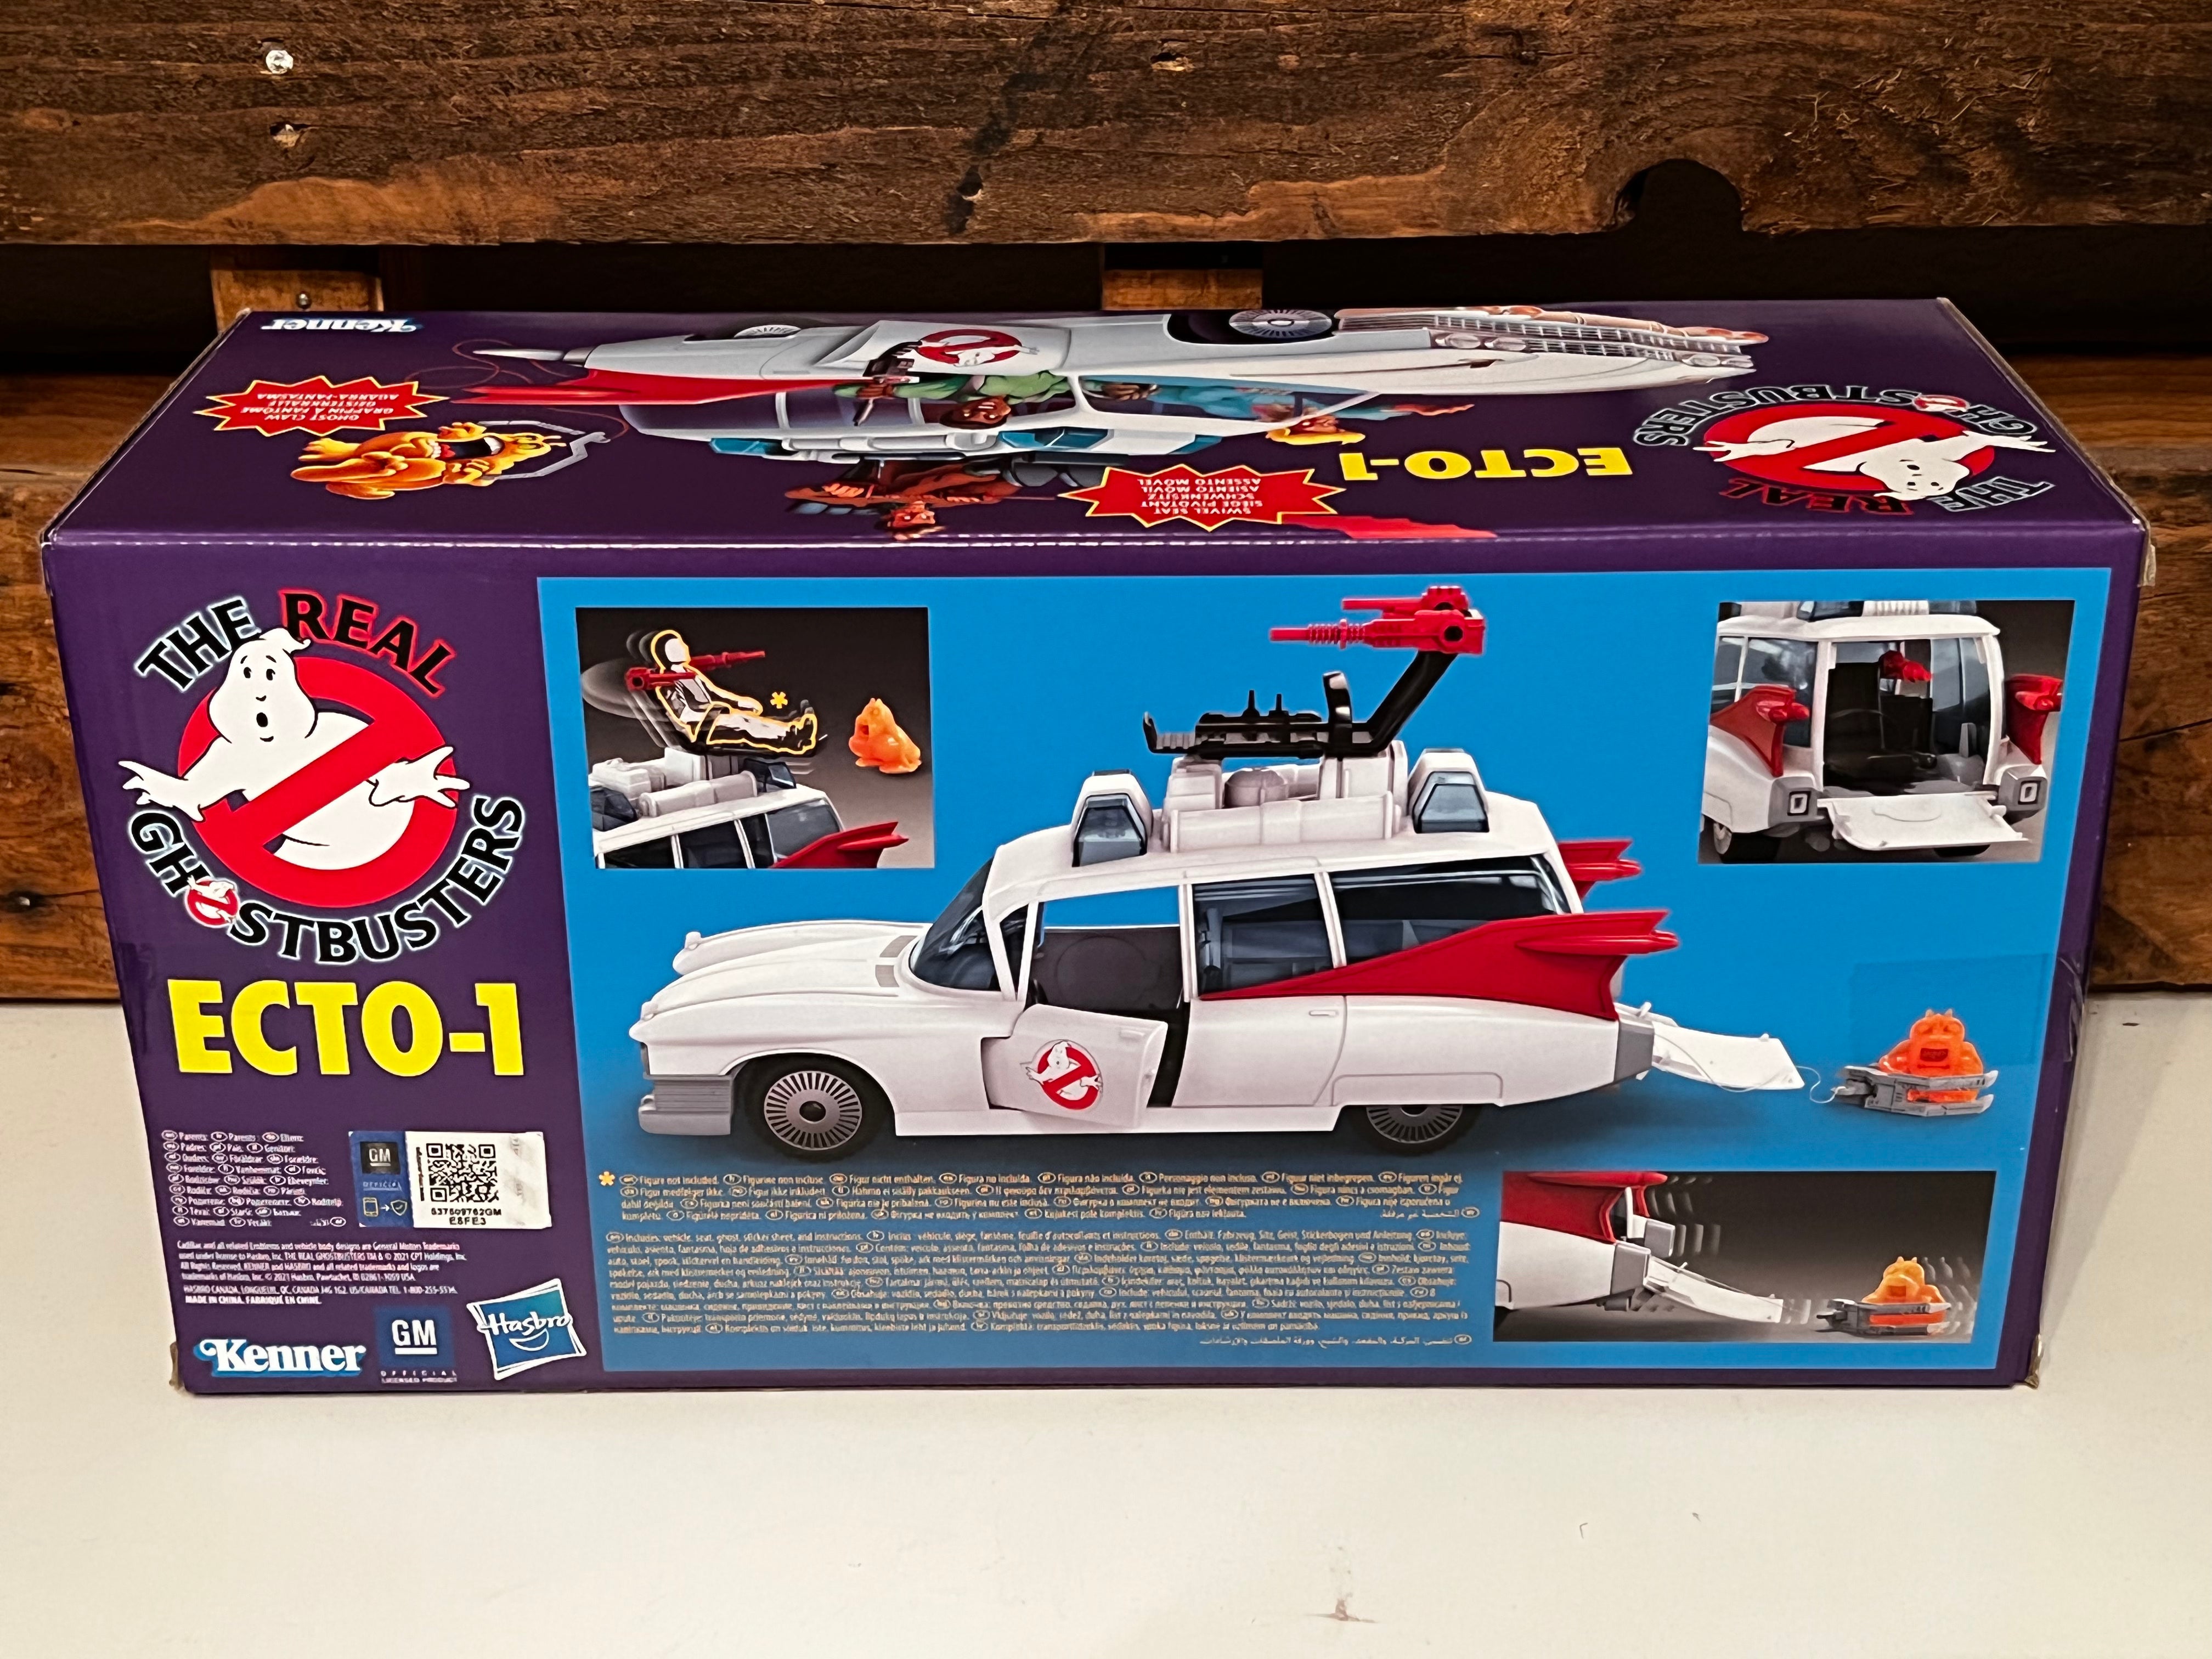 The Real Ghostbusters Retro-Ecto 1